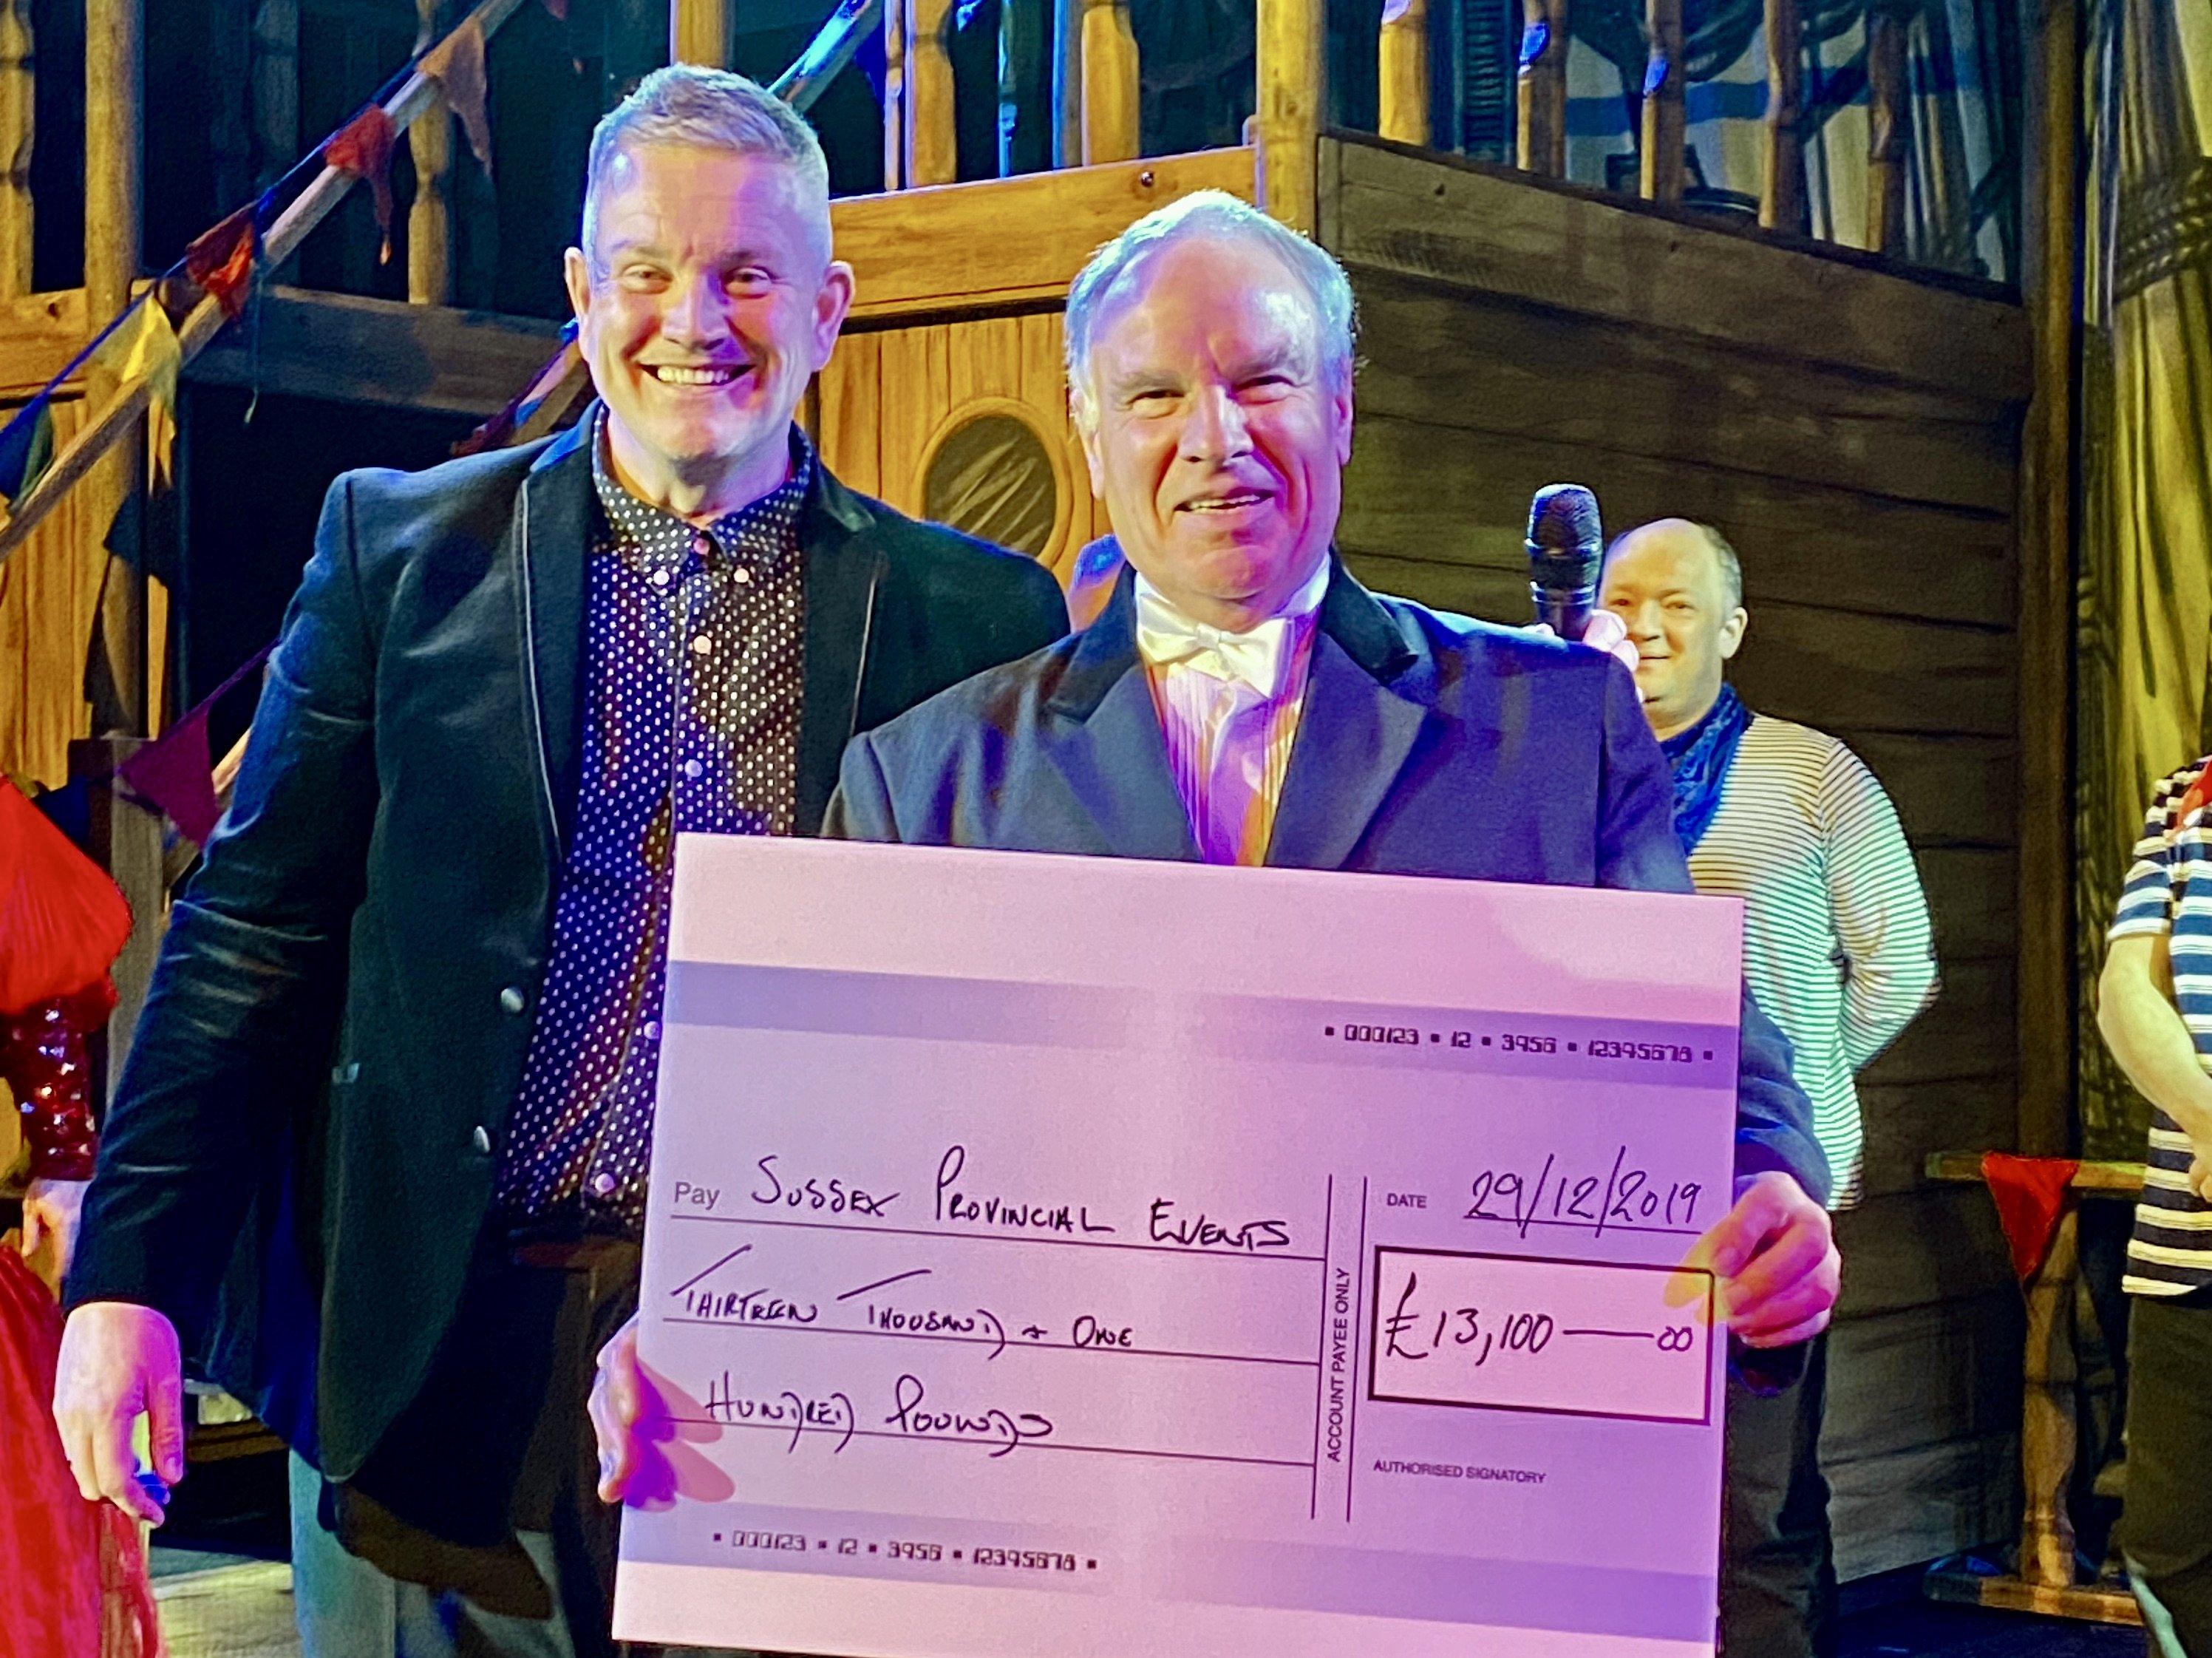 The show raised an amazing £13,100 towards the refurbishment of the Masonic Provincial Centre